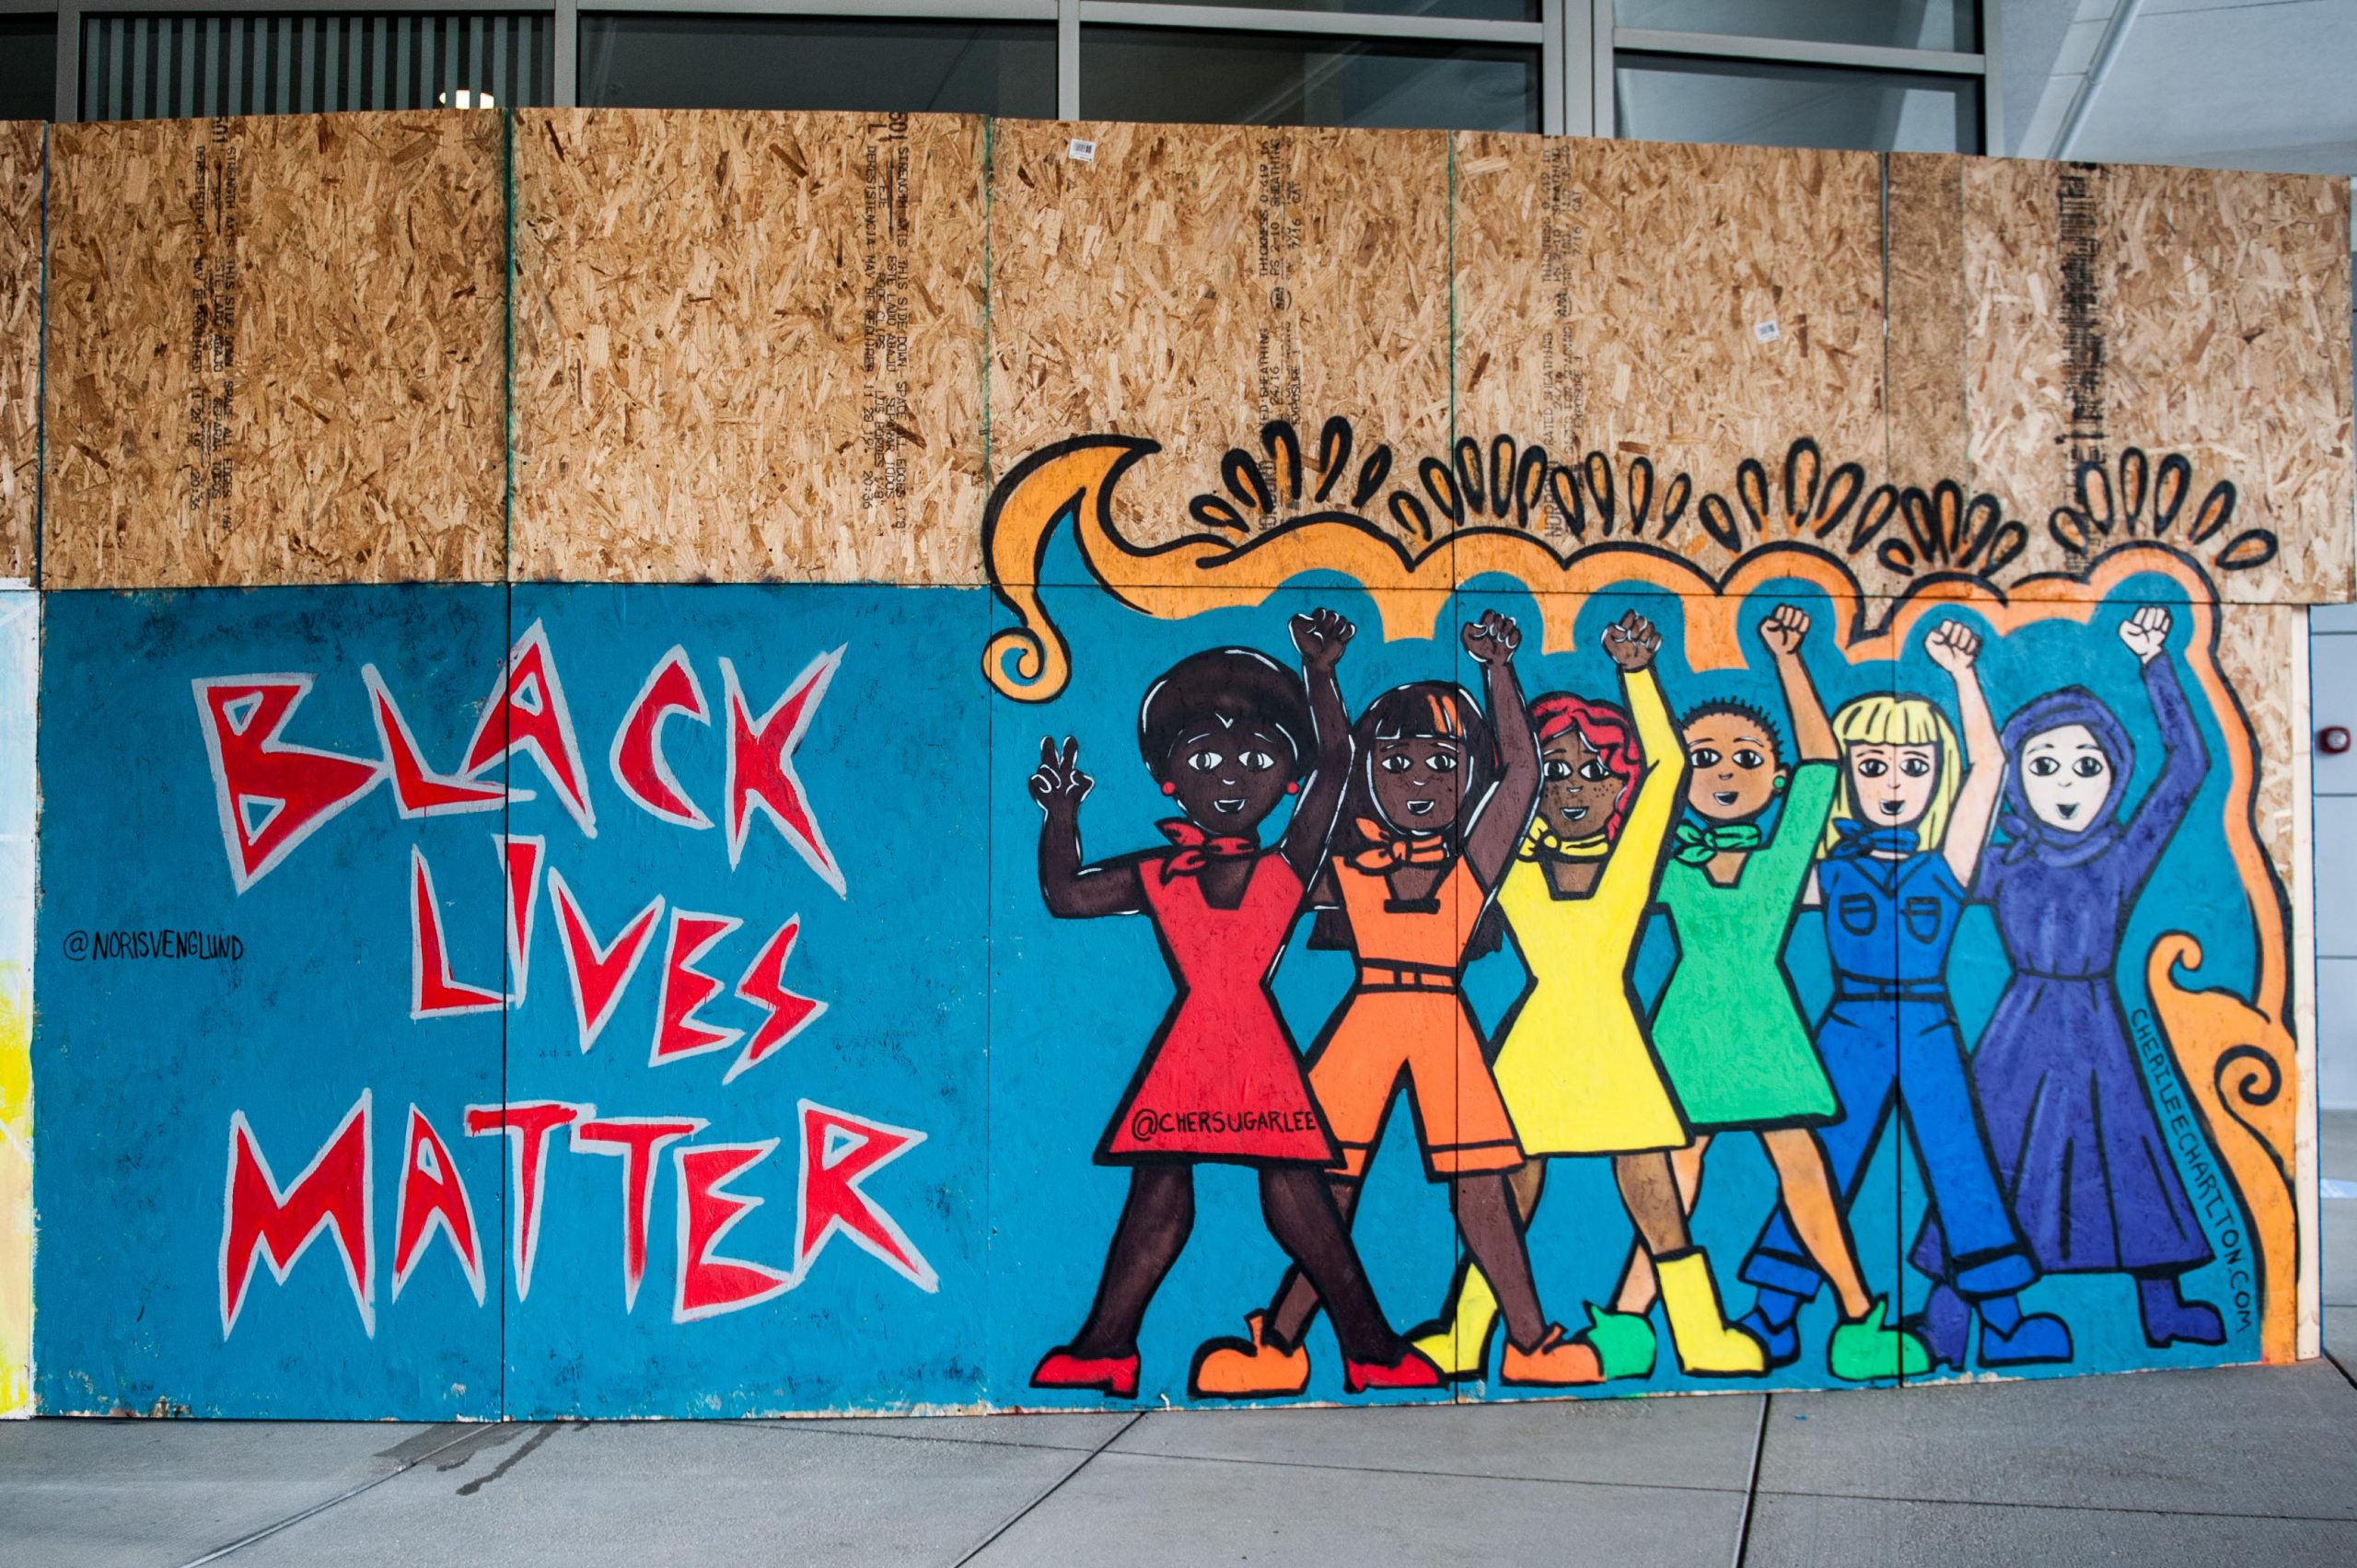 Two board murals. The left one says "Black Lives Matter" and the right one features women of different ethnicities all holding their fists up in solidarity.